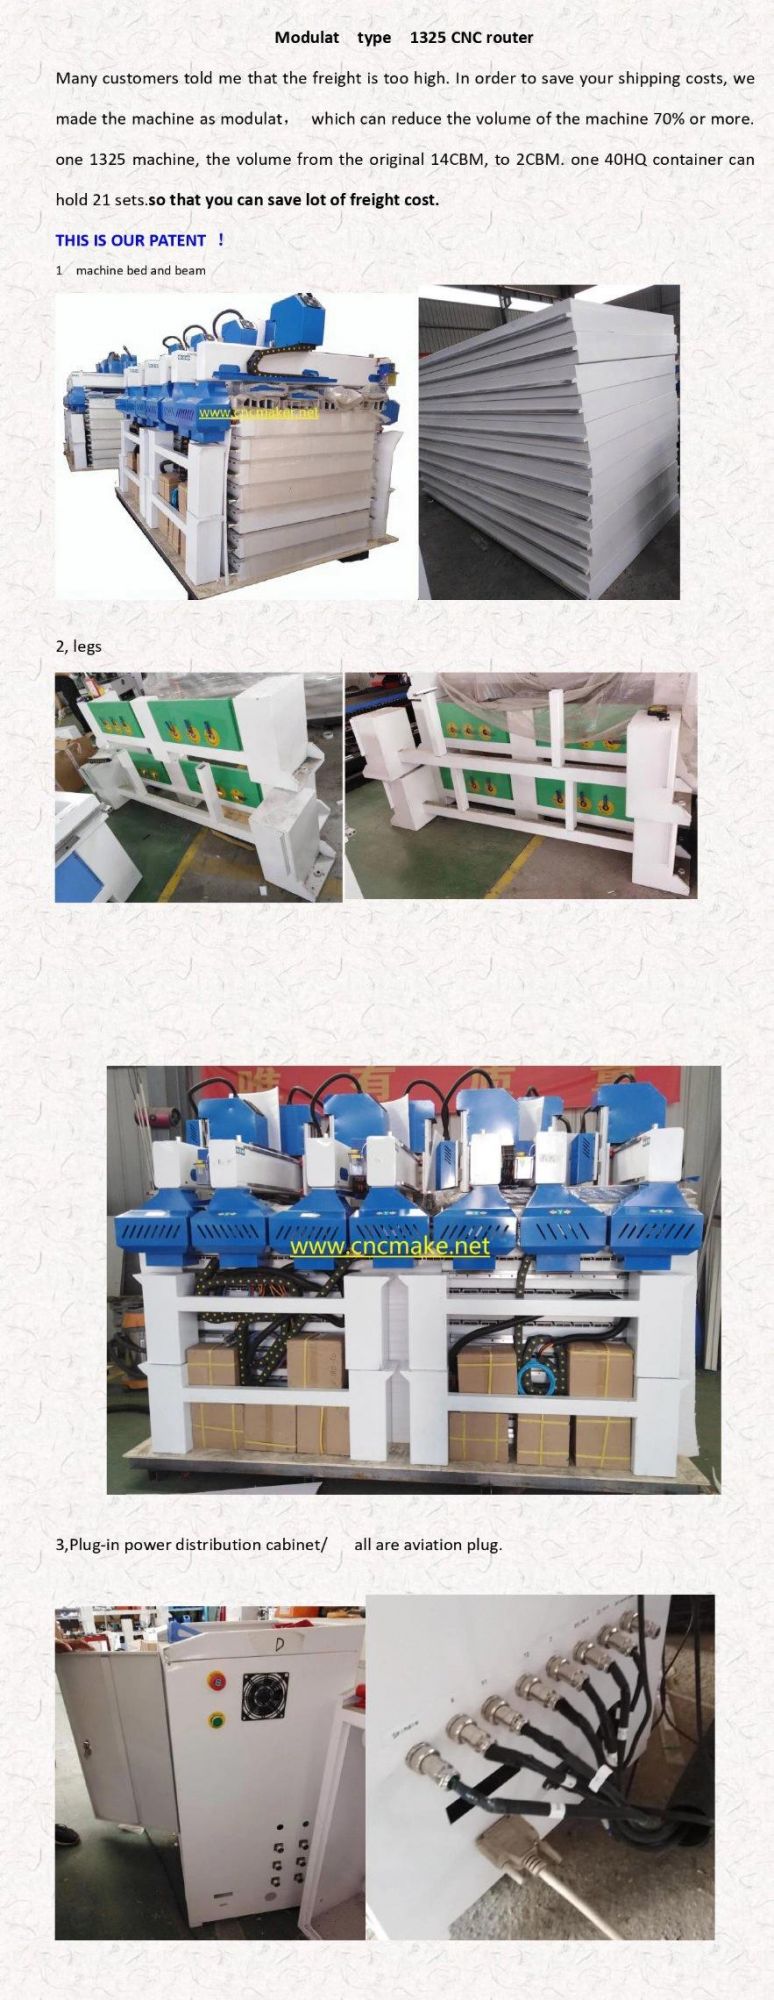 1325/2030/1530 Wood/Wooden/Woodworking CNC Router Machine/Woodworking Engraving Machine for Woodworking Carving